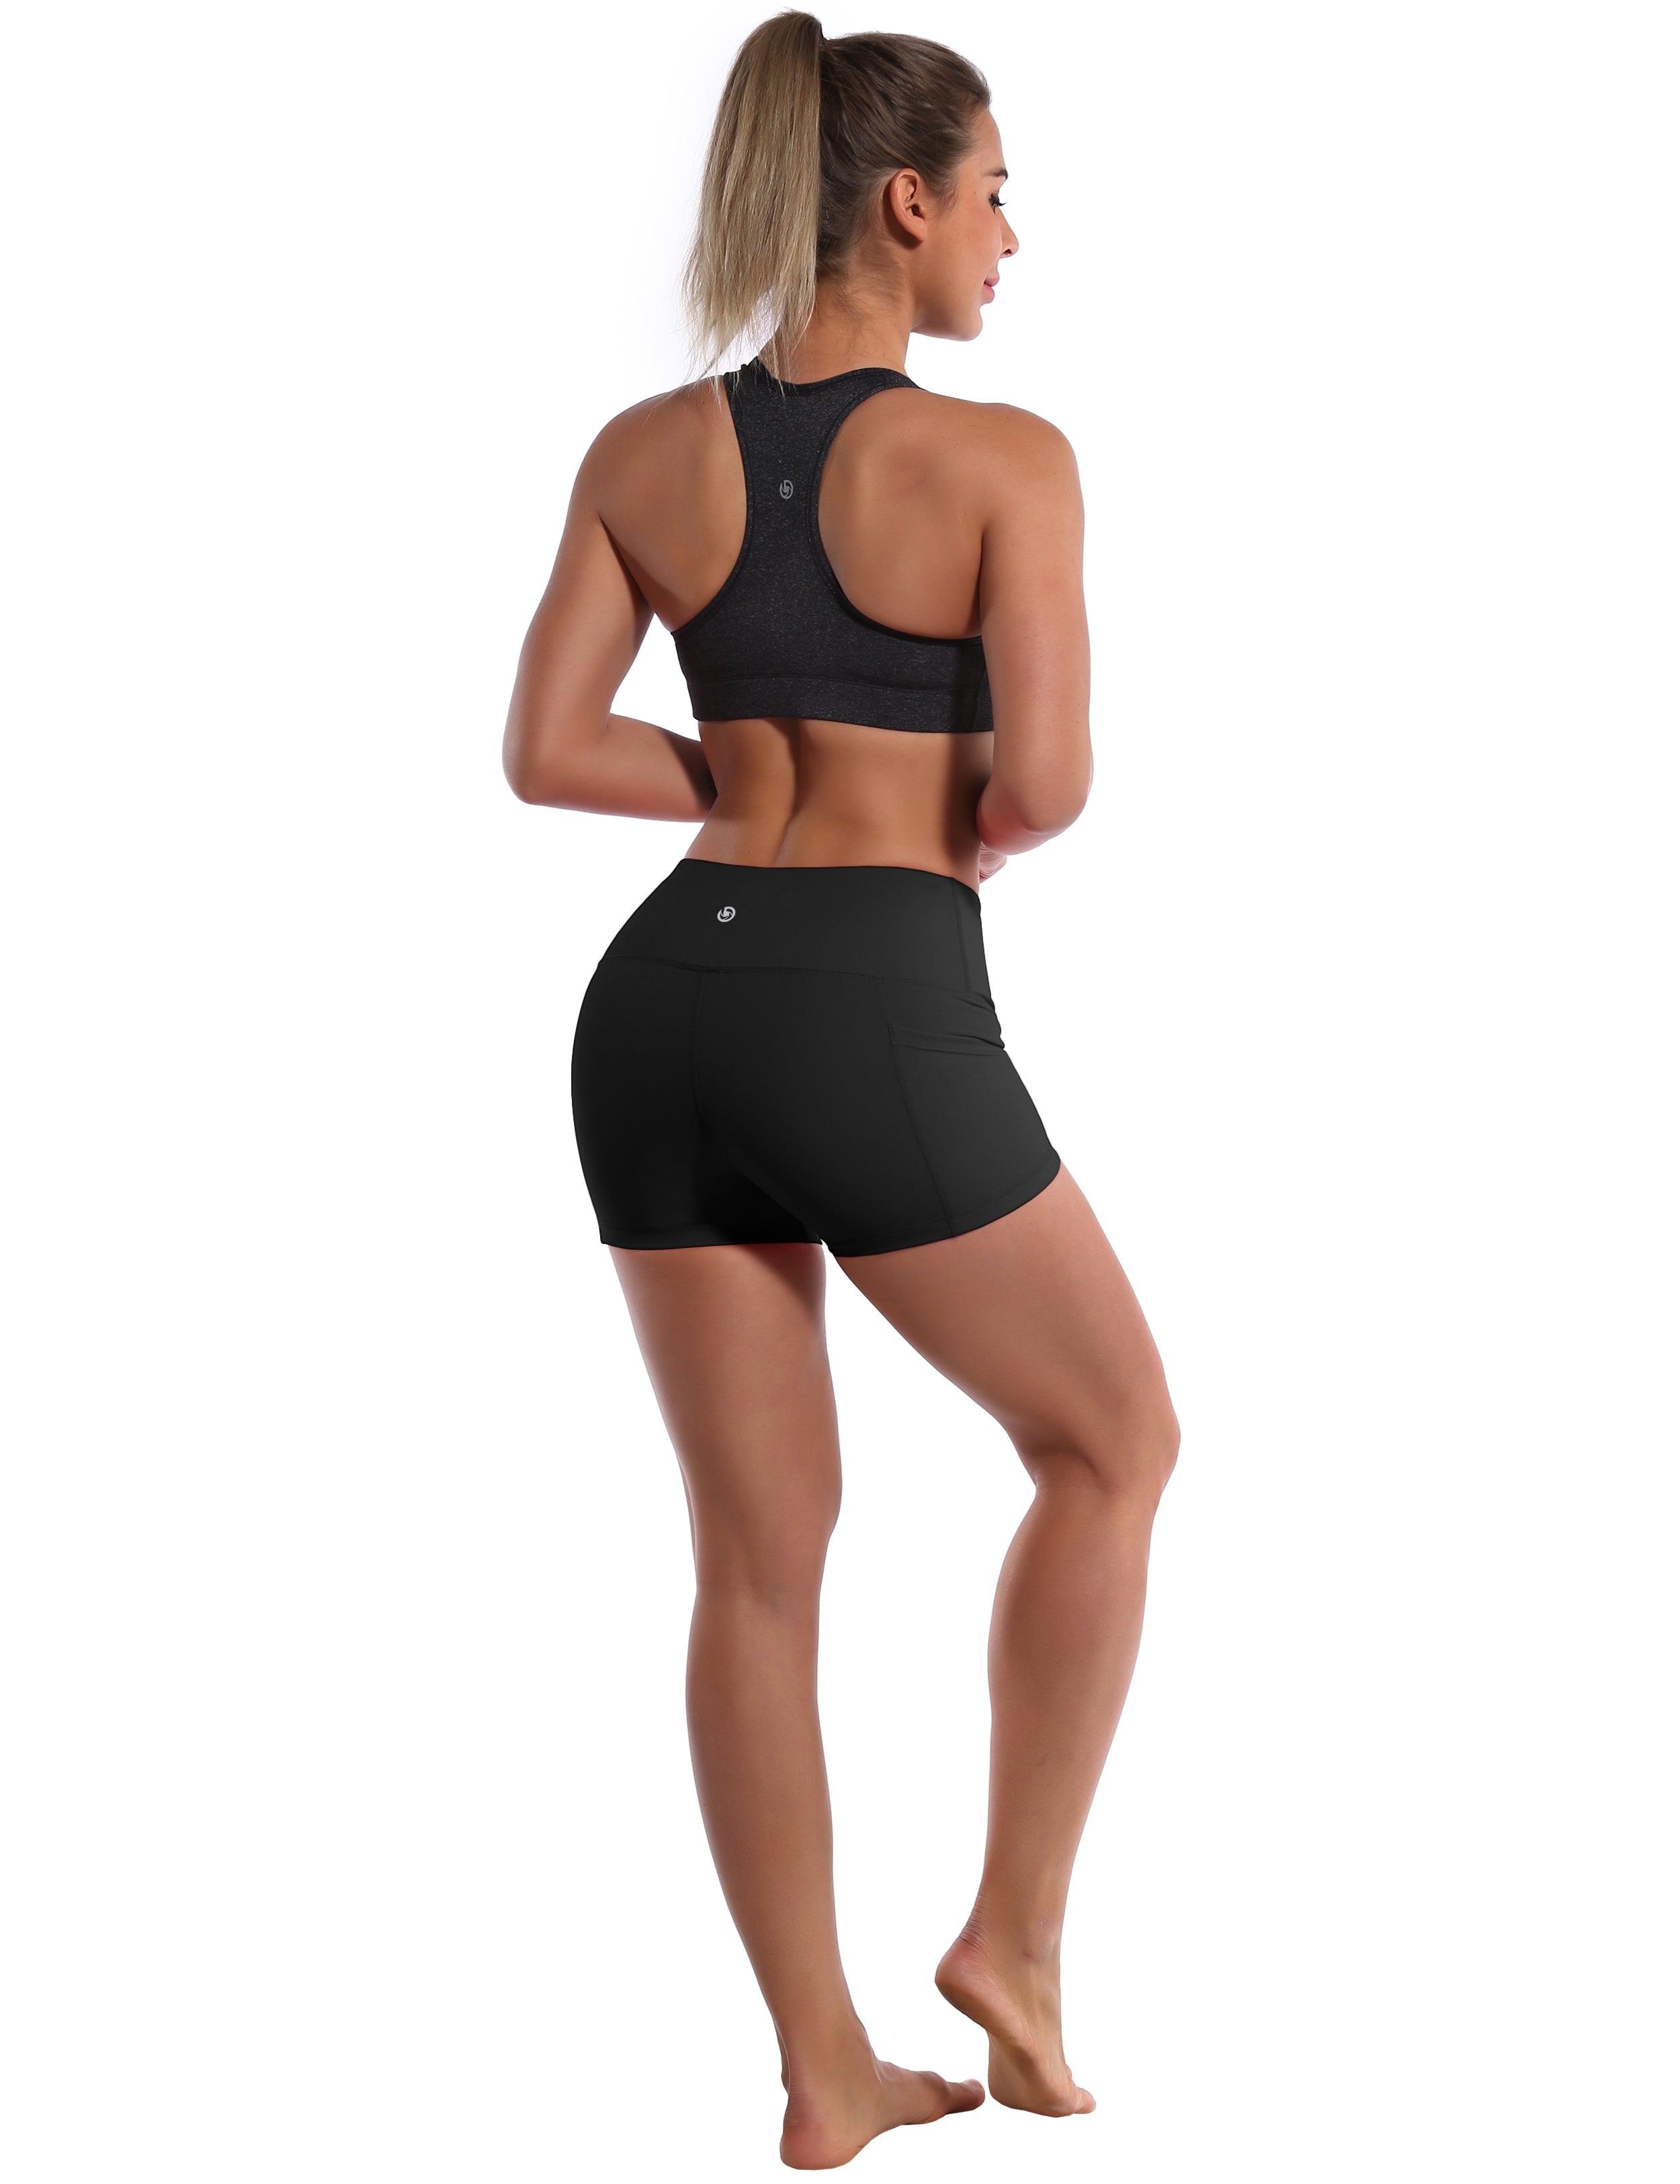 2.5" Side Pockets Yoga Shorts black Sleek, soft, smooth and totally comfortable: our newest sexy style is here. Softest-ever fabric High elasticity High density 4-way stretch Fabric doesn't attract lint easily No see-through Moisture-wicking Machine wash 78% Polyester, 22% Spandex